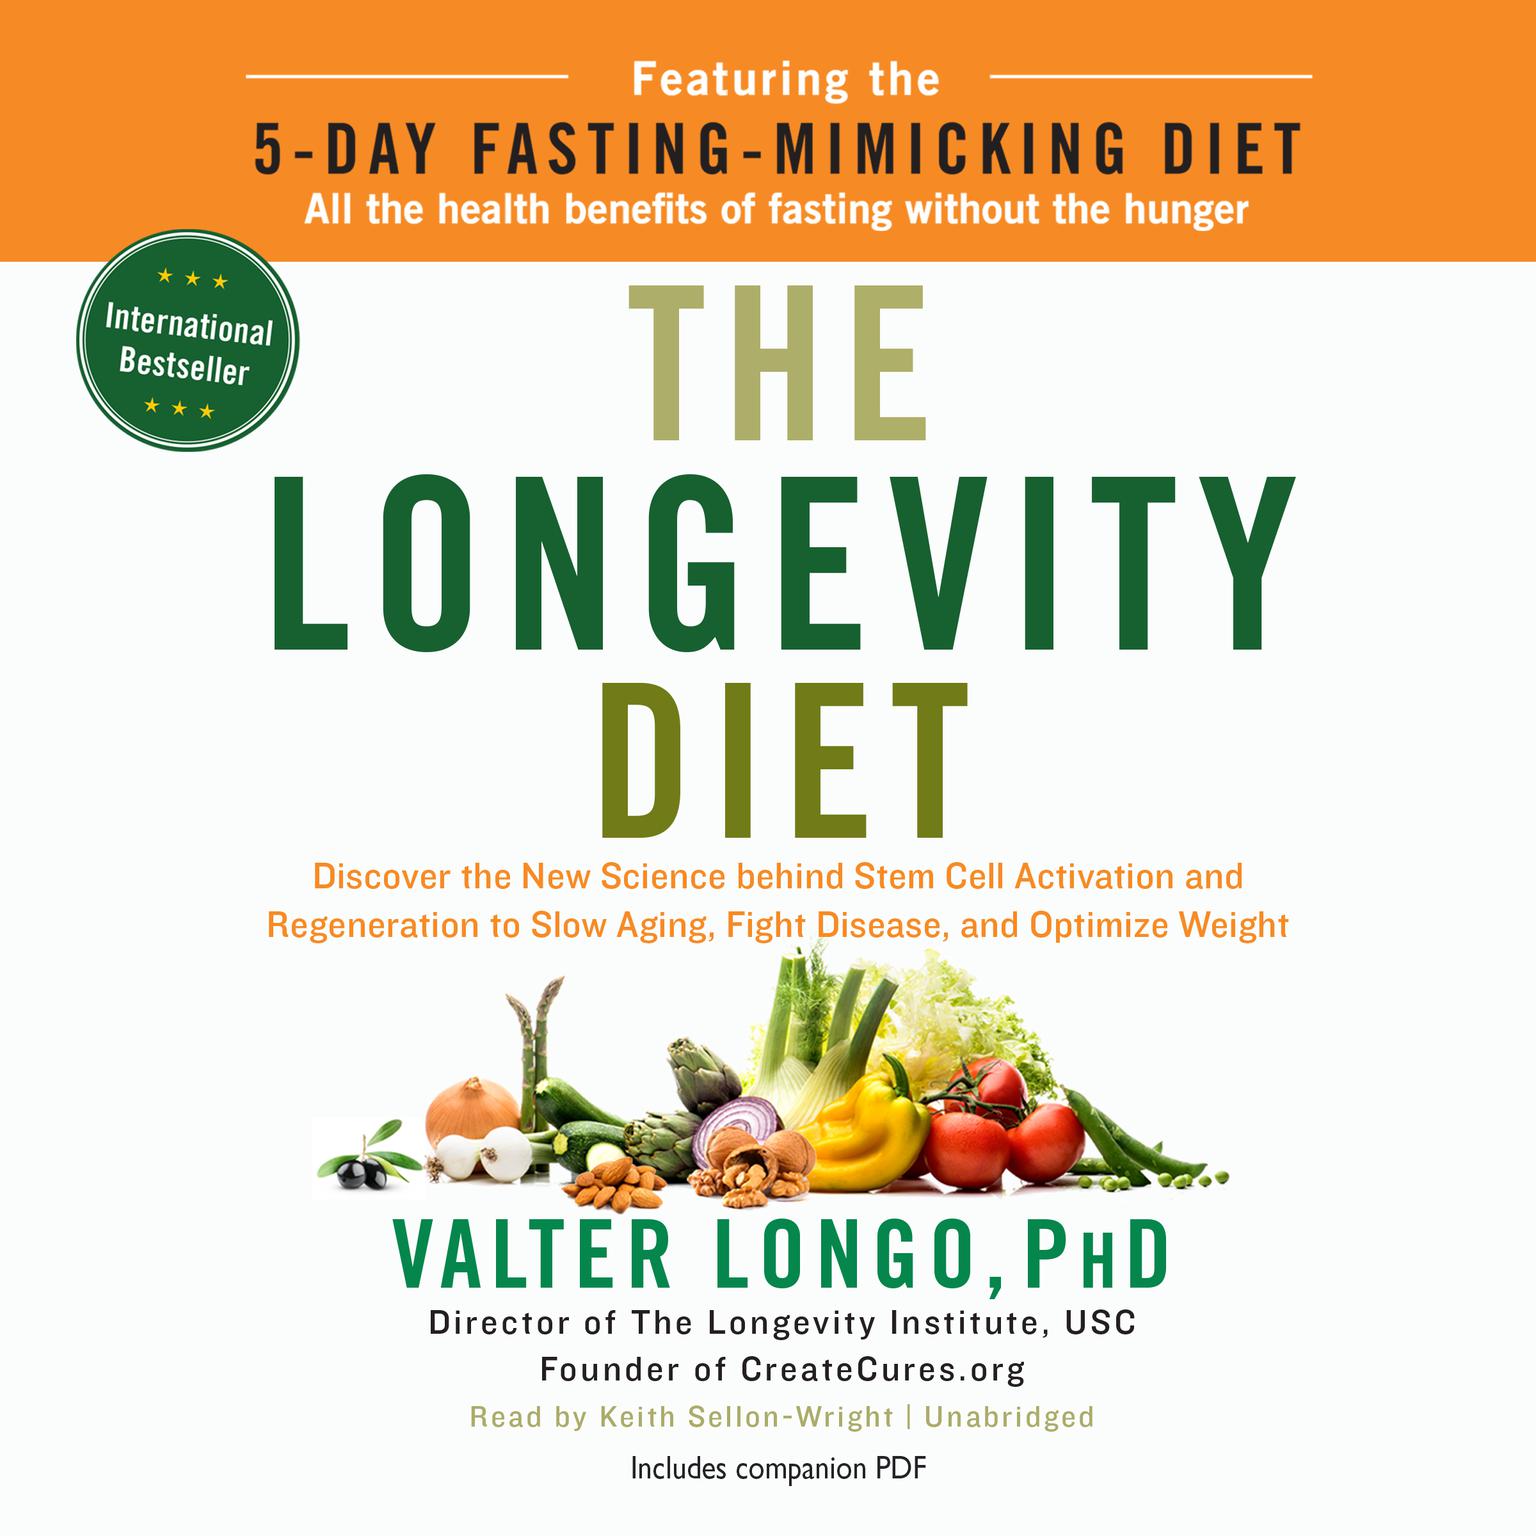 The Longevity Diet: Discover the New Science behind Stem Cell Activation and Regeneration to Slow Aging, Fight Disease, and Optimize Weight Audiobook, by Valter Longo